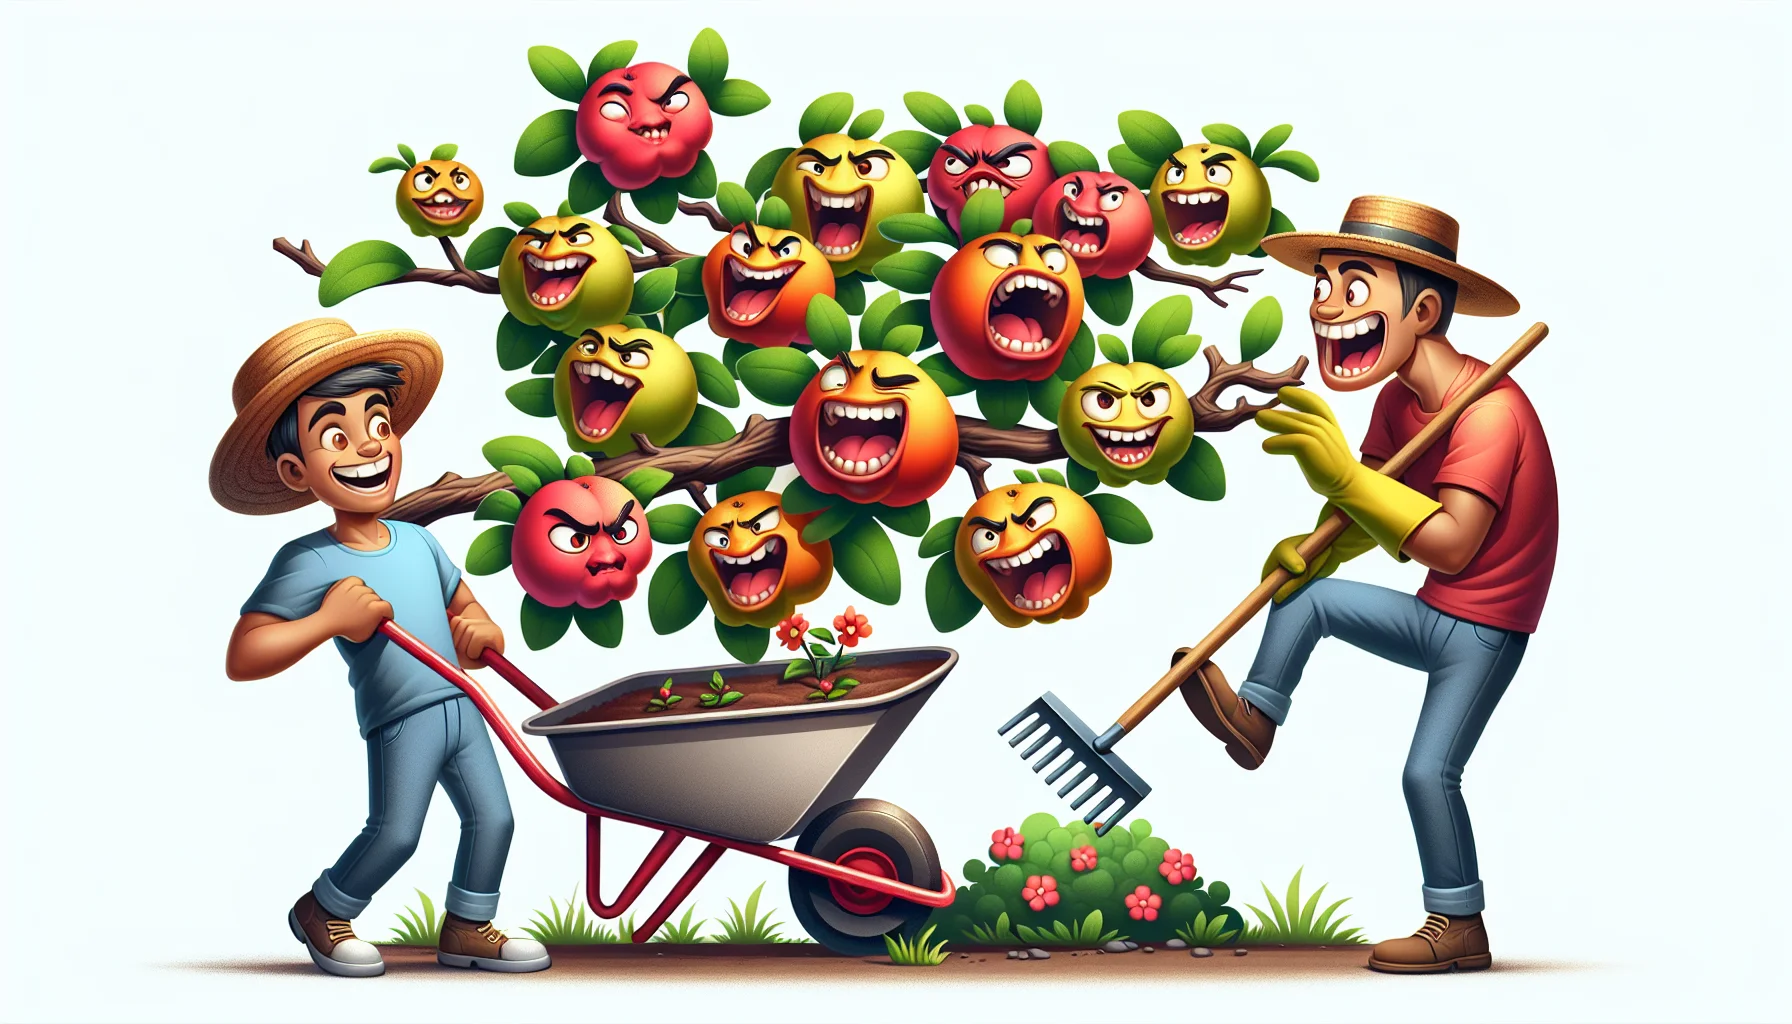 Create an image showcasing a branch heavy with ripe flowering quince fruits perched comically off the side of a garden wheelbarrow. The fruits appear comically animated with vibrant colors and exaggeratedly plump shapes, as if jovially enticing viewers. A cheerful young Hispanic man is tugging at the branch lightly, his eyes wide with mock surprise. He is appropriately dressed for gardening, wearing a straw hat, protective gloves, and a garden apron. A Black woman is laughing heartily, holding a rake in her hand as she stands near a flourishing garden bed in the background. This image exudes a joyful scene encouraging an interest in gardening.